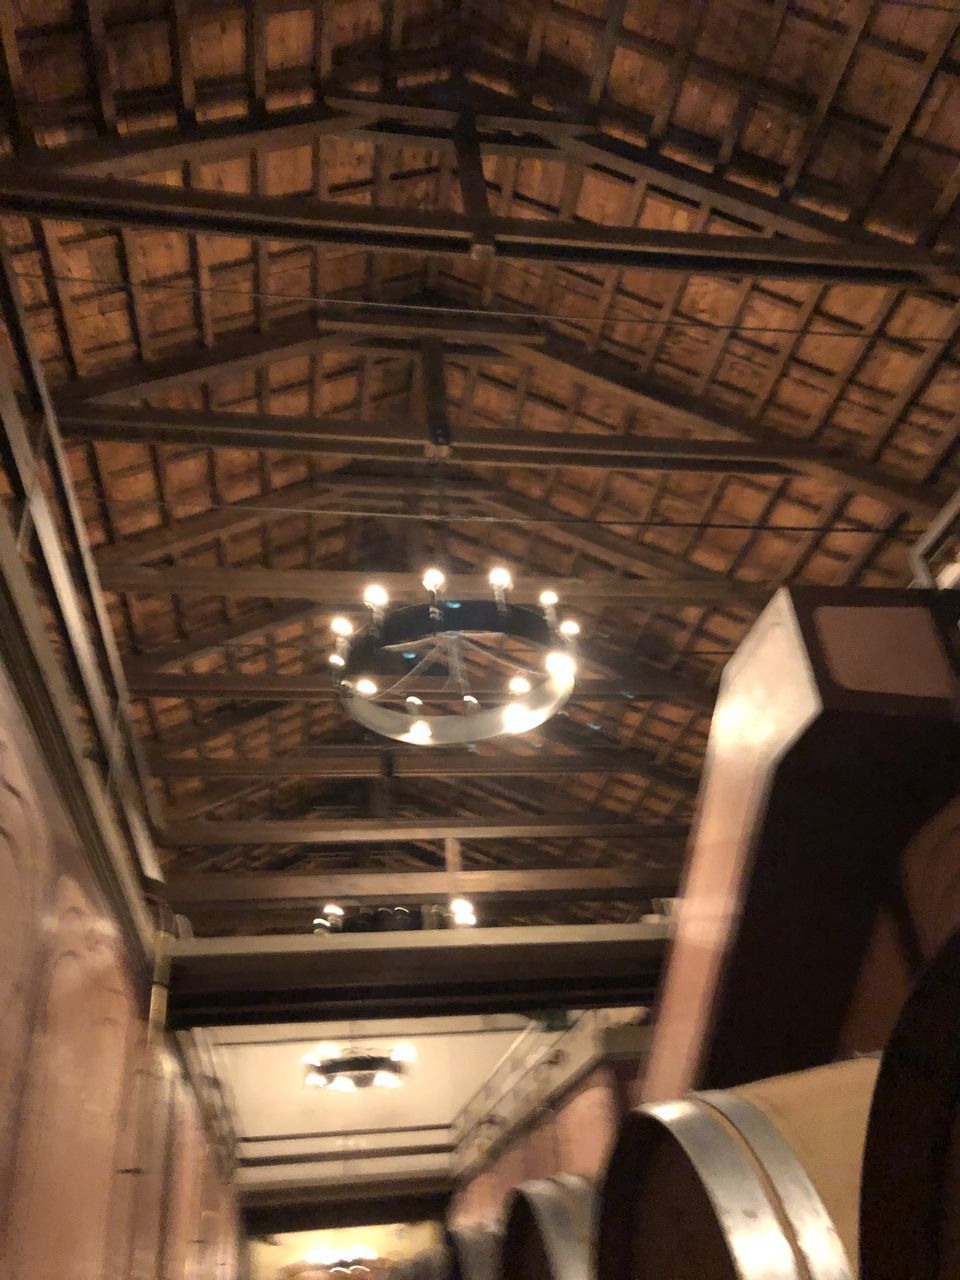 LOW ANGLE VIEW OF ILLUMINATED PENDANT LIGHTS HANGING IN CEILING